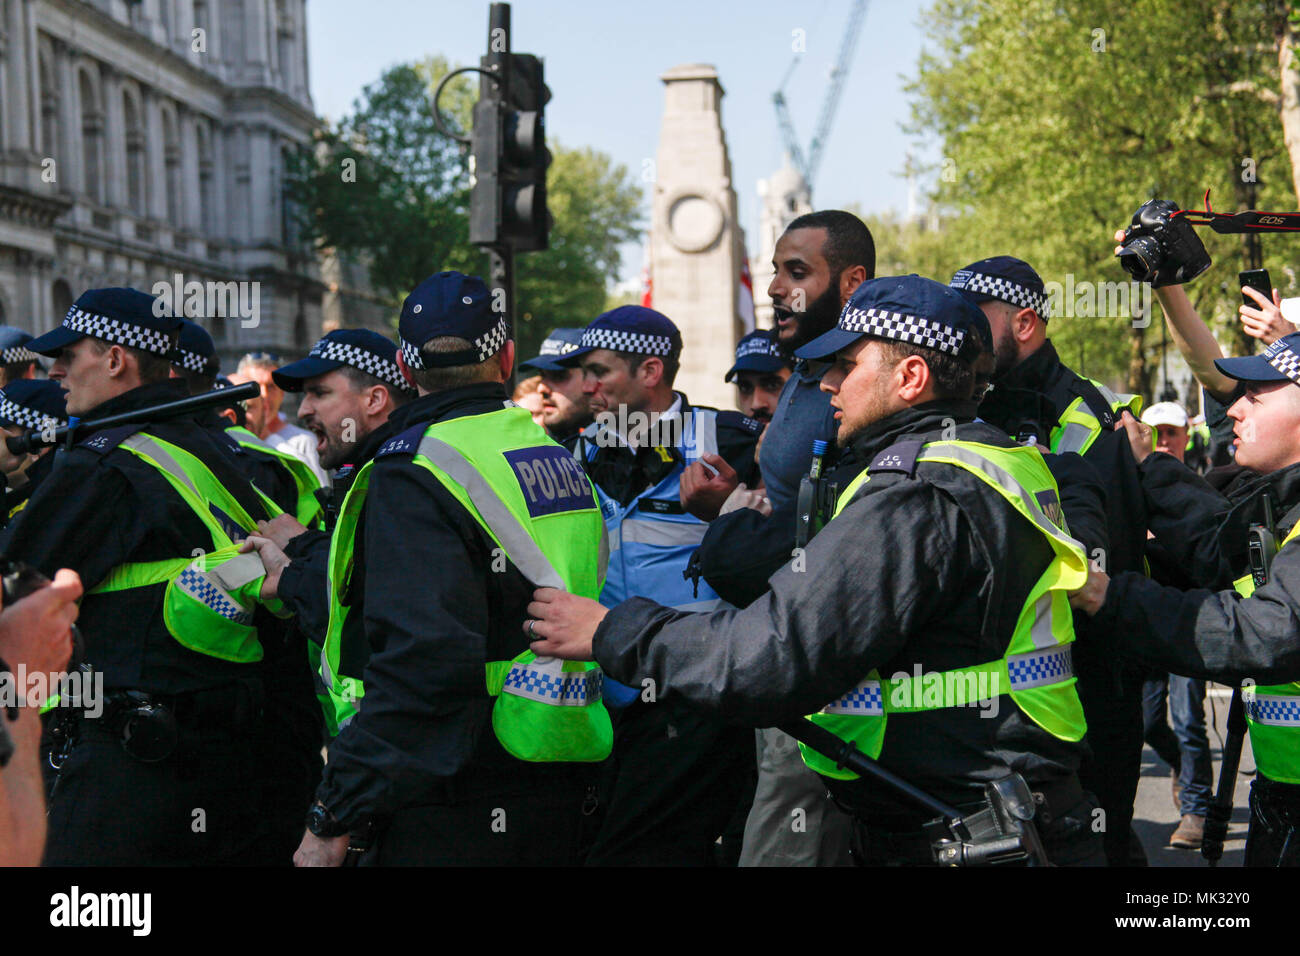 London, UK. 6th May 2018. Police Officers arrest a counter protester at the Day for Freedom March Credit: Alex Cavendish/Alamy Live News Stock Photo